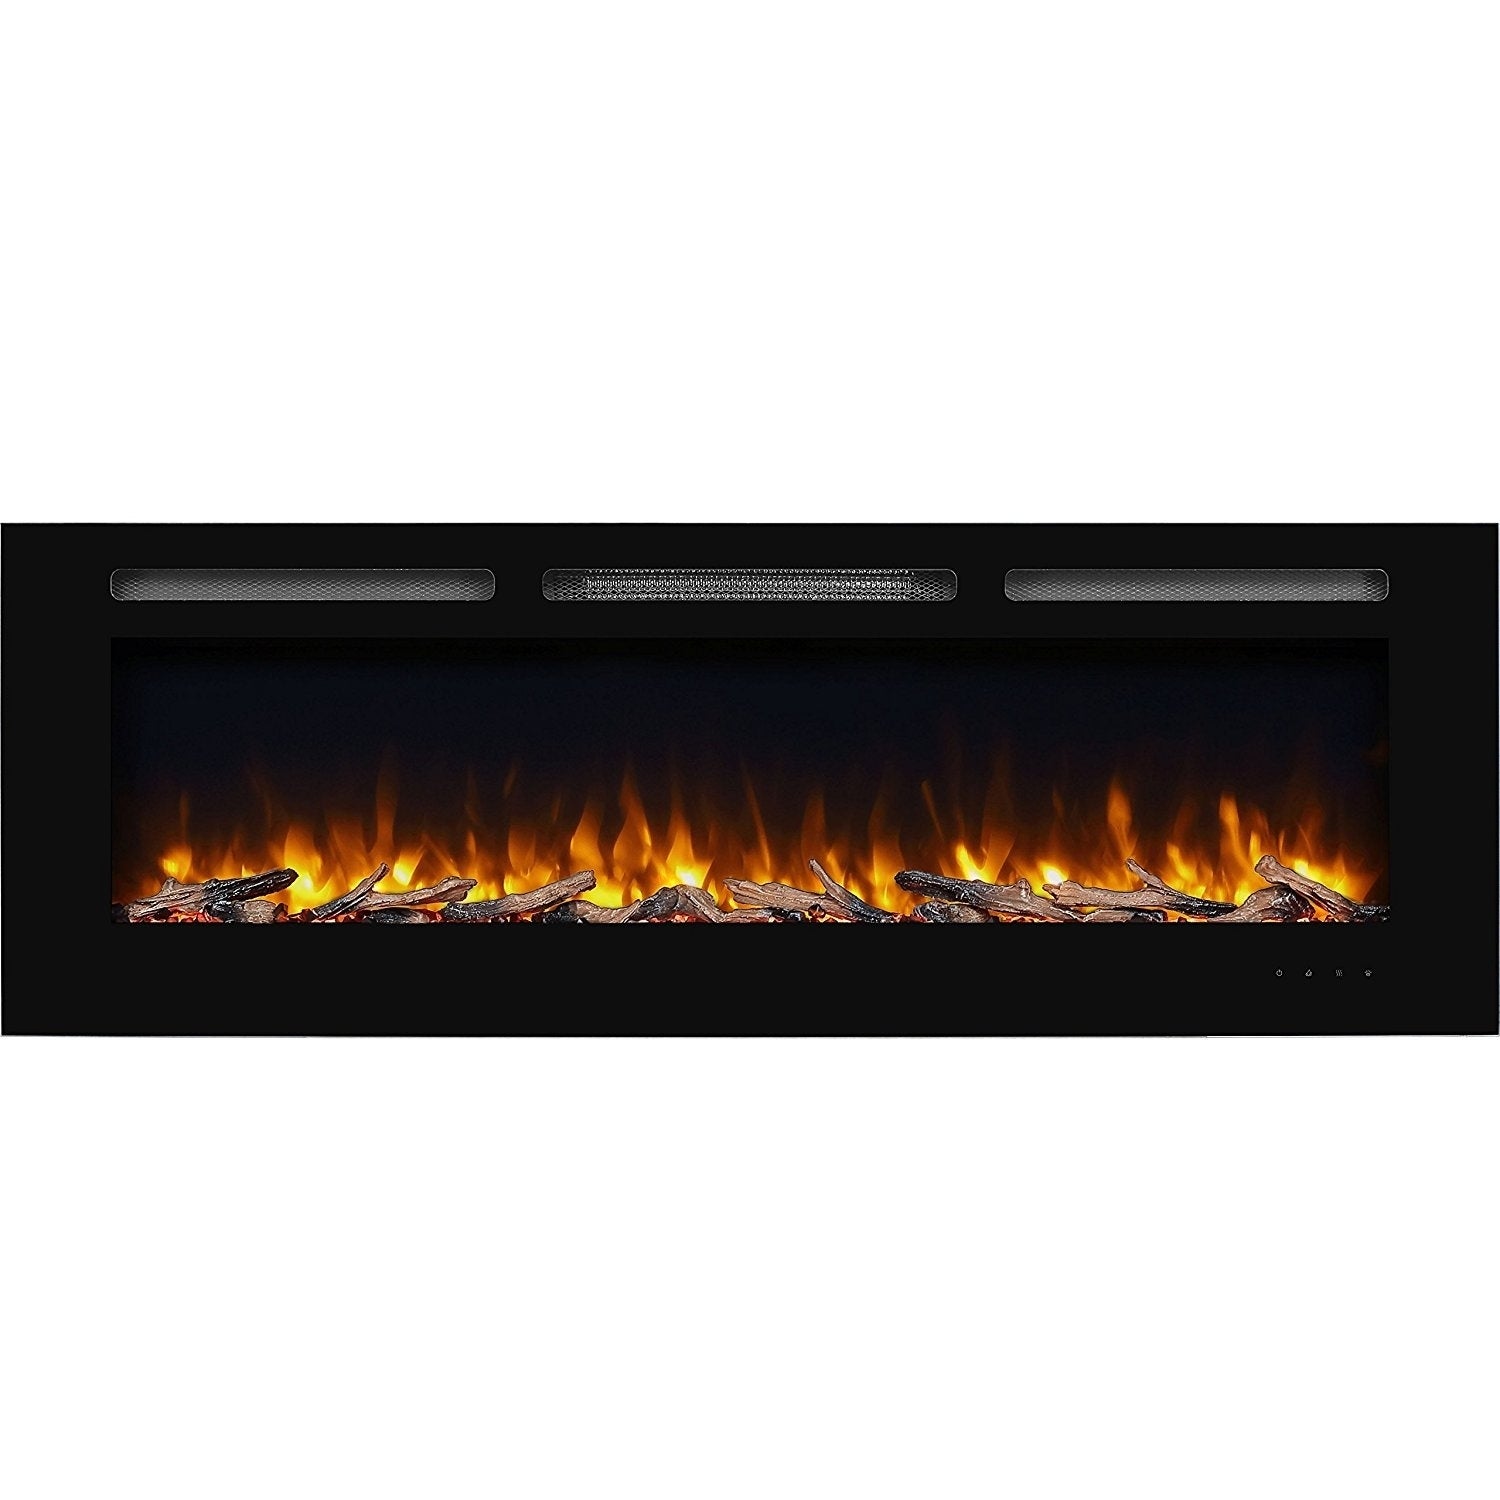 Wall Mounted Fireplace tools Fresh 60" Alice In Wall Recessed Electric Fireplace 1500w Black